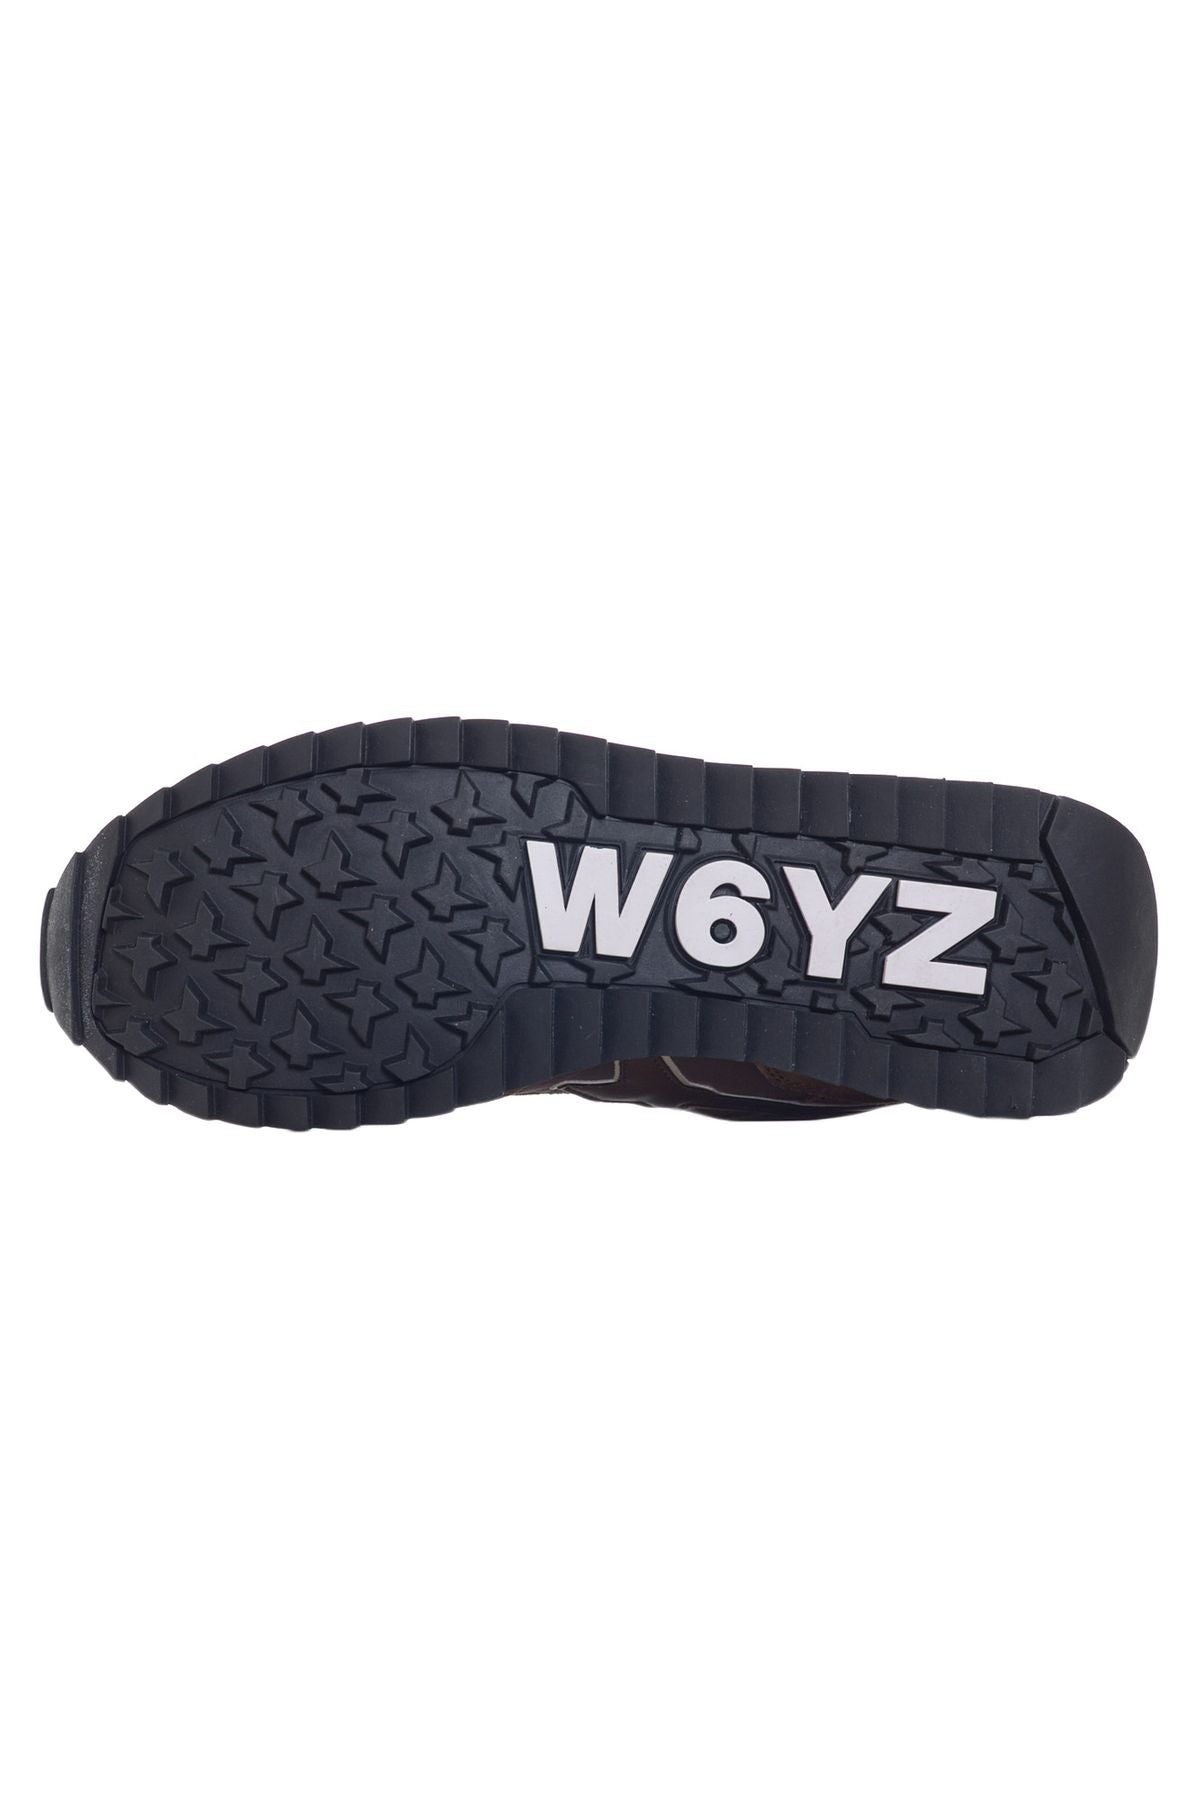 W6YZ Sneakers Autunno/Inverno 0012015185